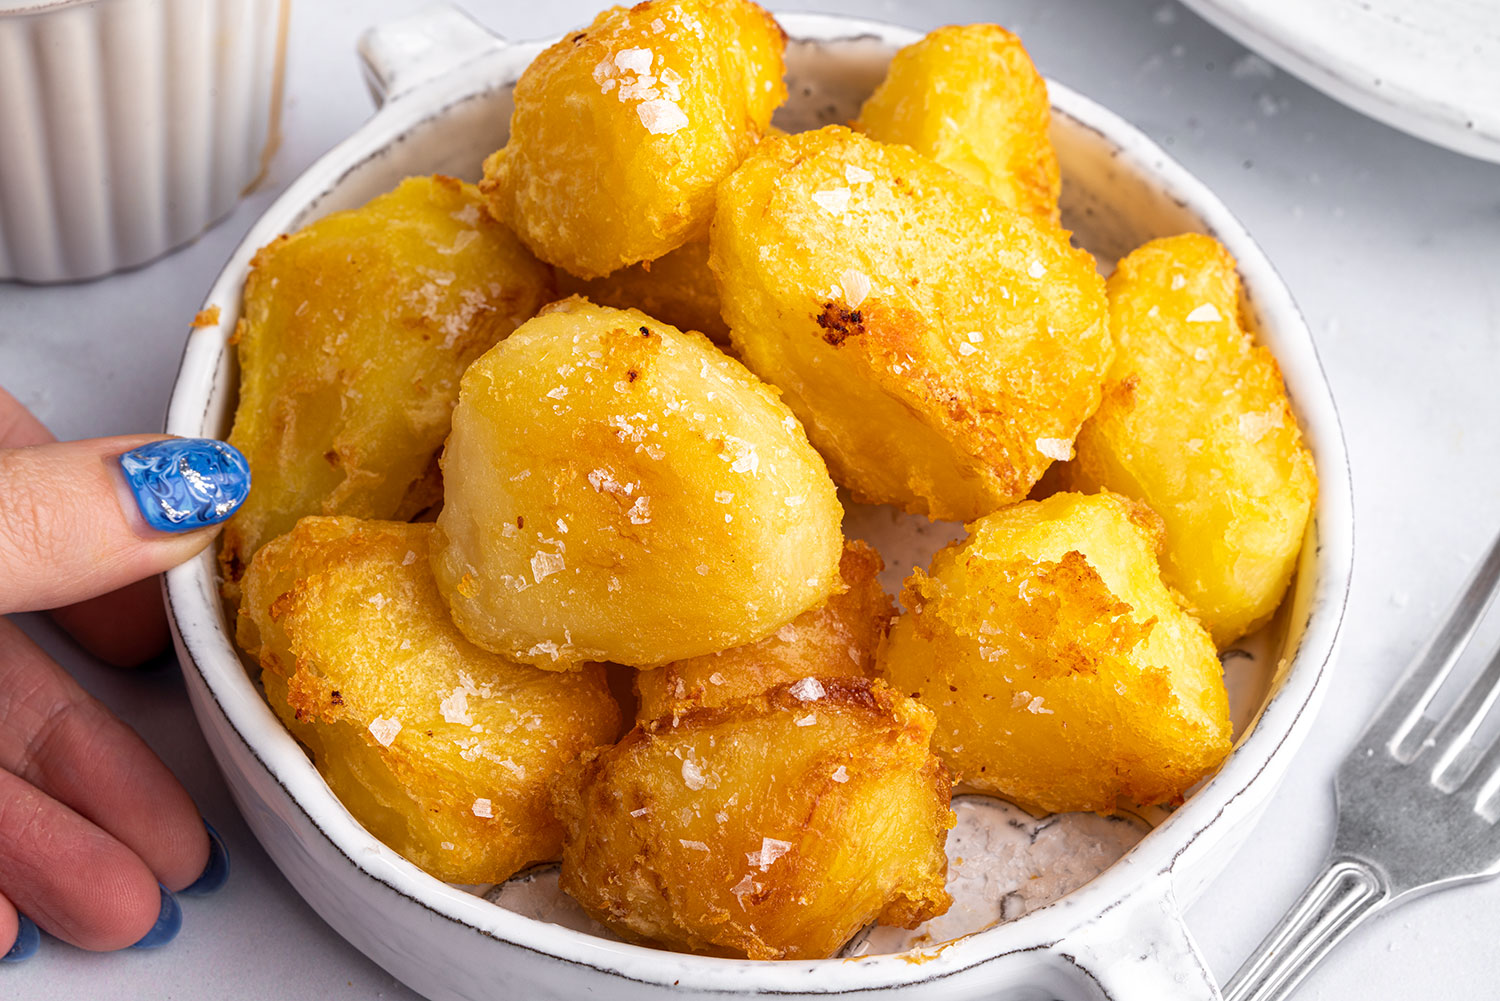 Cook Jamie Oliver's Roasted Potatoes